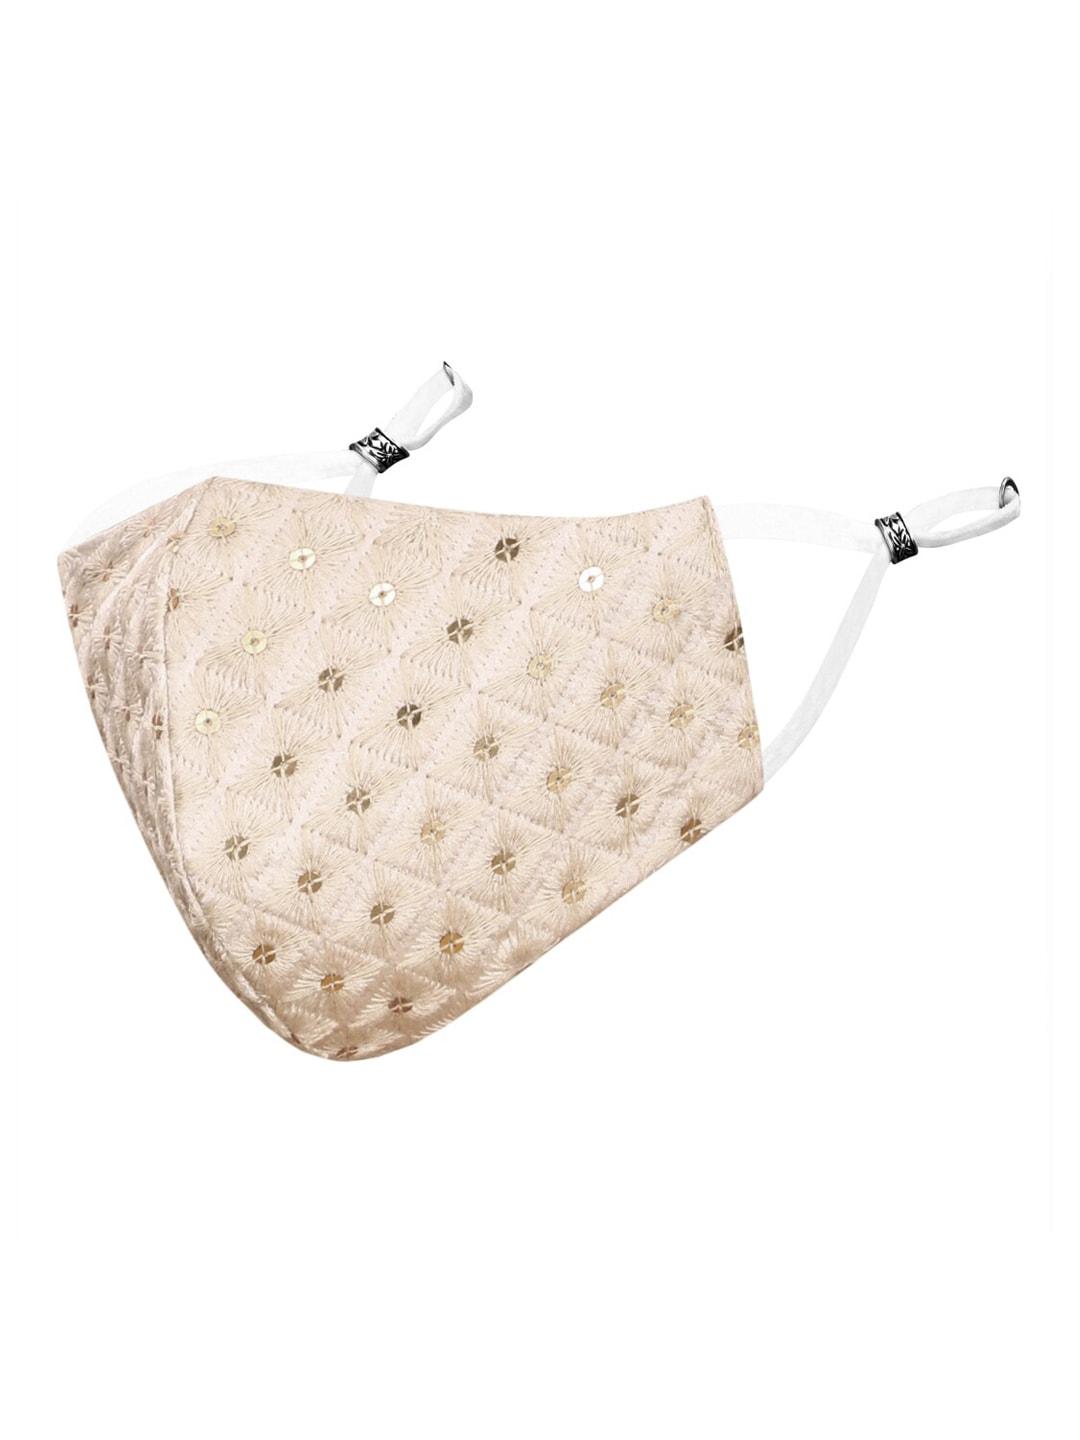 masq-beige-embroidered-&-sequinned-4-ply-reusable-anti-pollution-cloth-mask